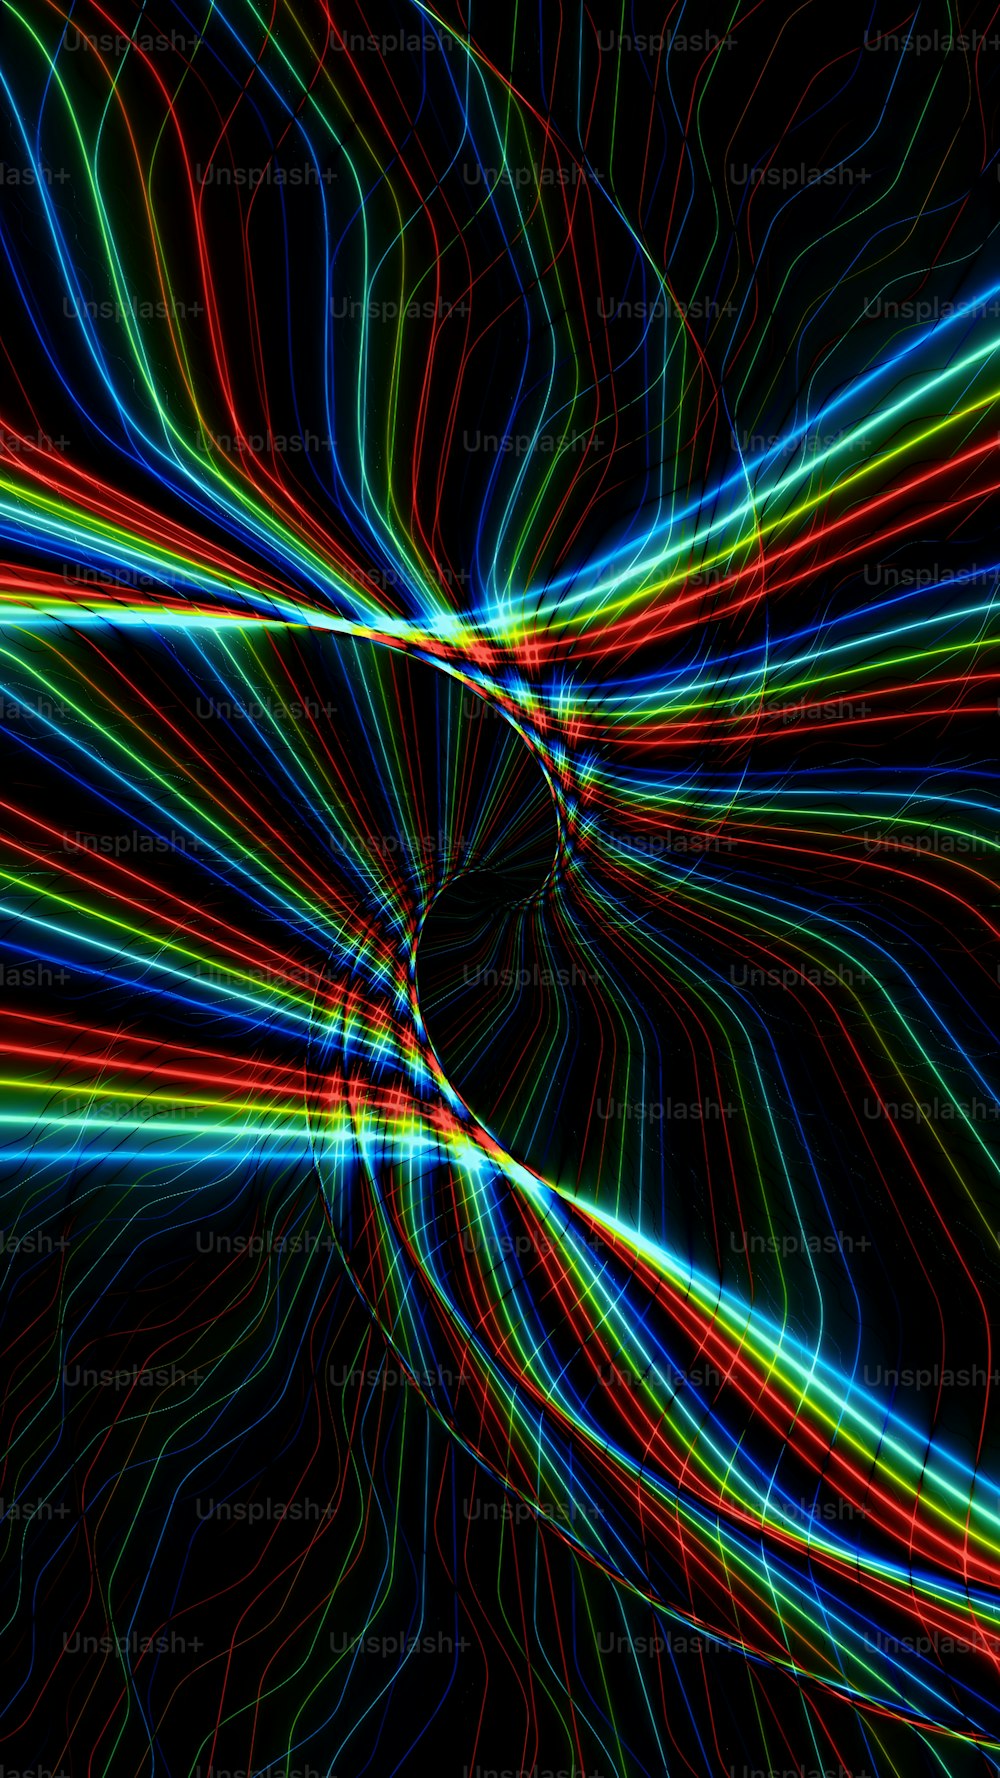 an abstract image of a spiral of colored lines